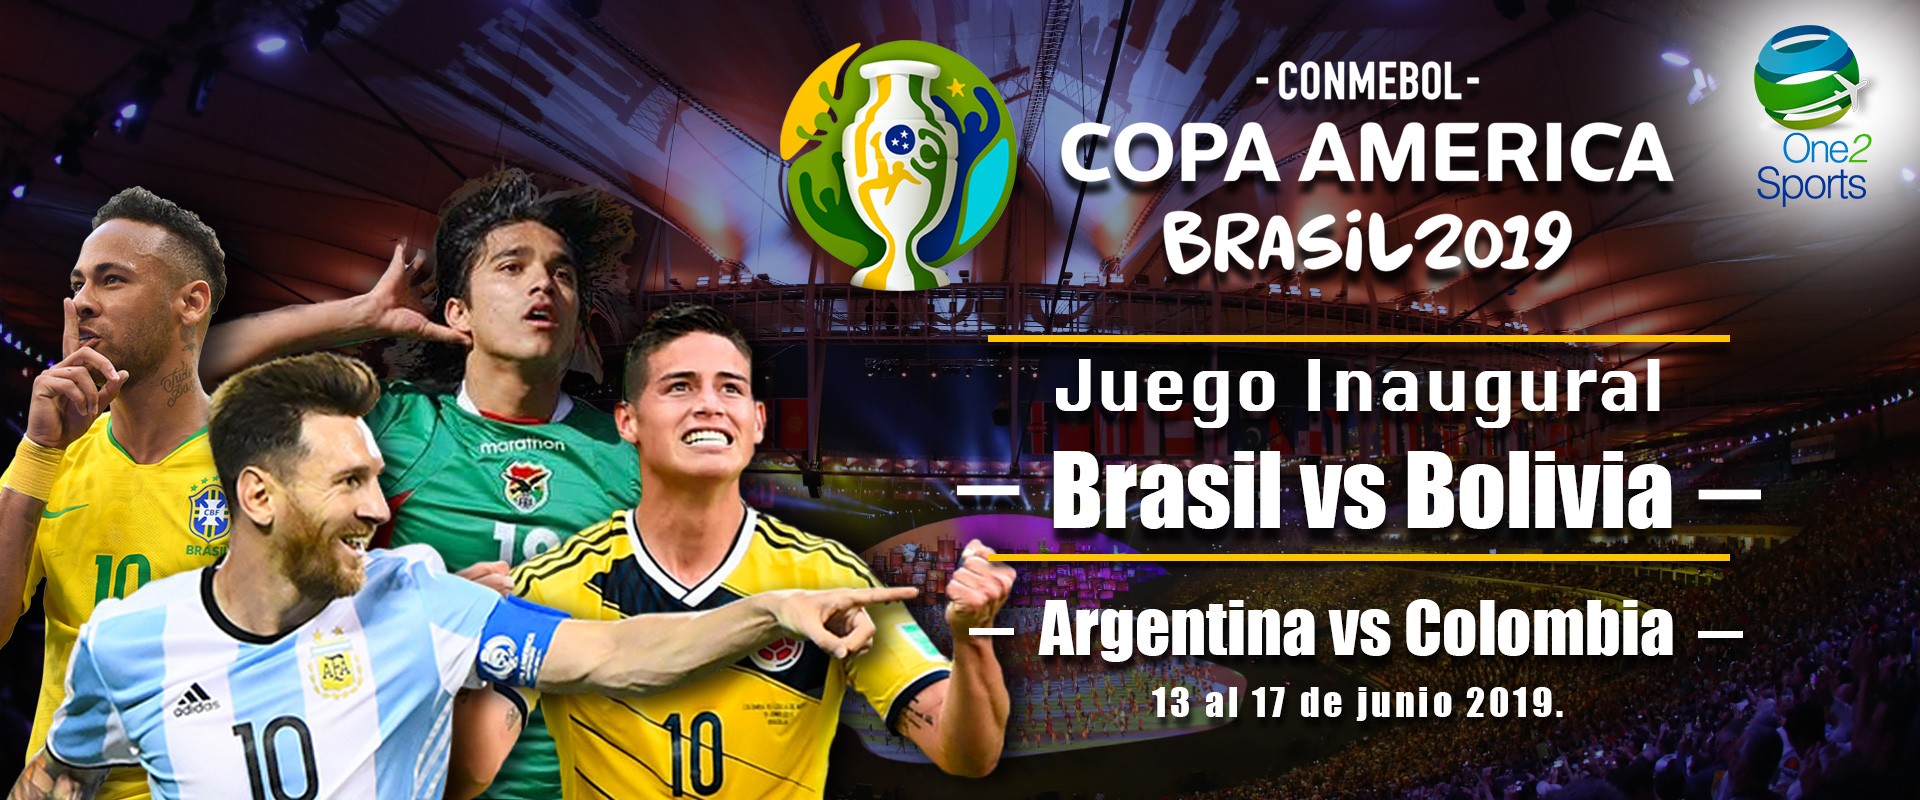 Juego Inaugural y Argentina vs Colombia | One2 Travel Group